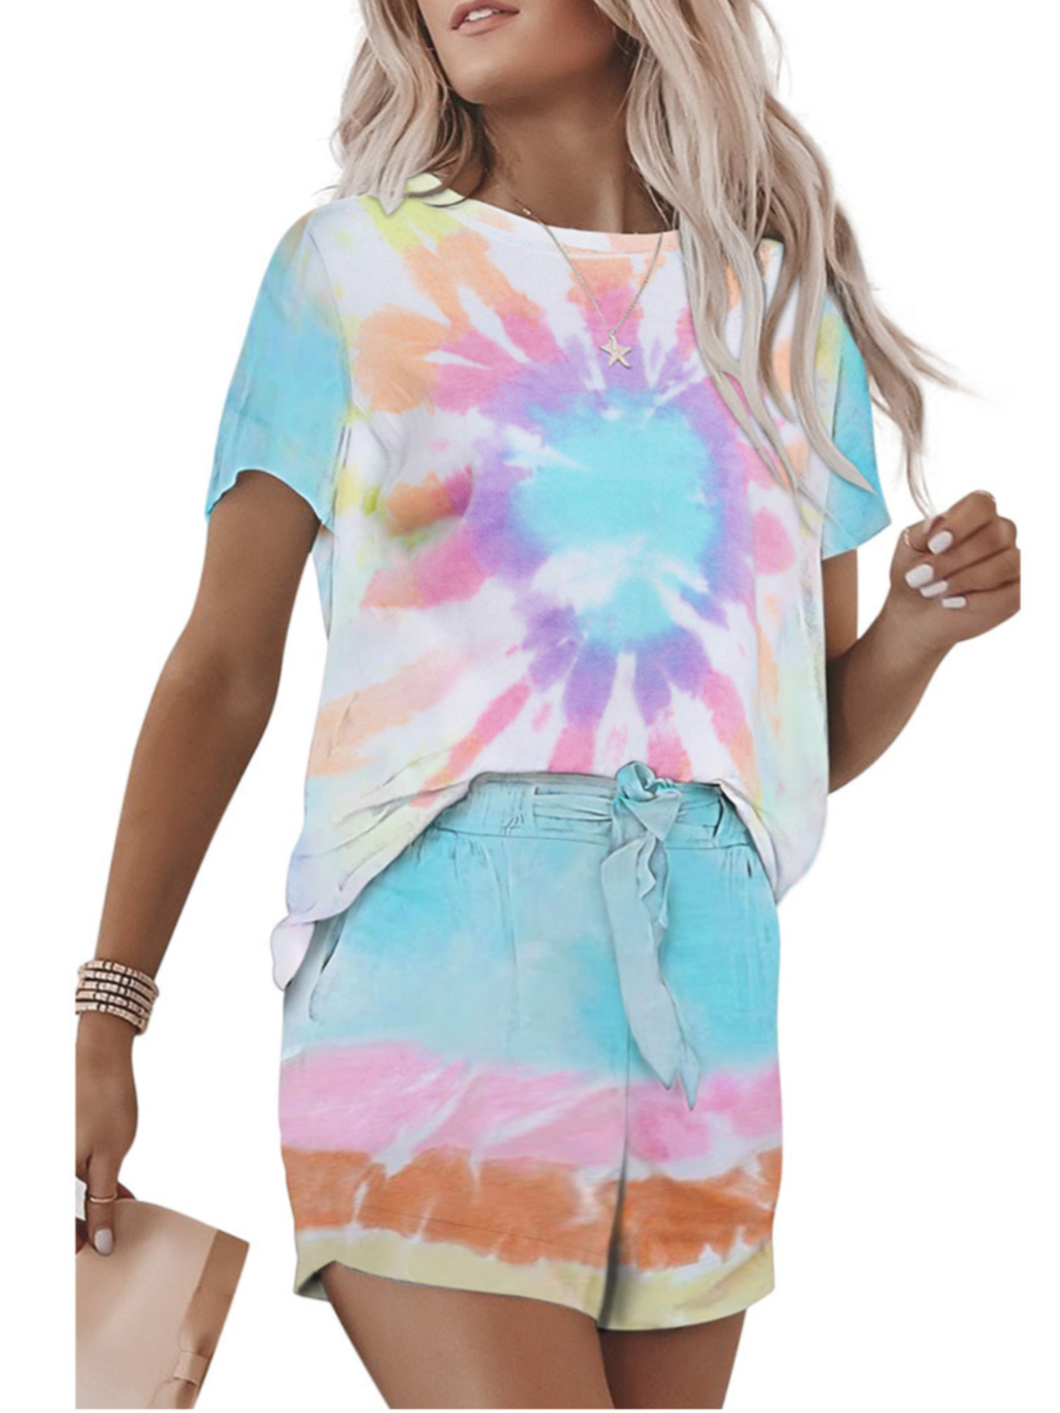 Tie Dye Lounge Short Set - Assorted Colors Was $50 Now $18